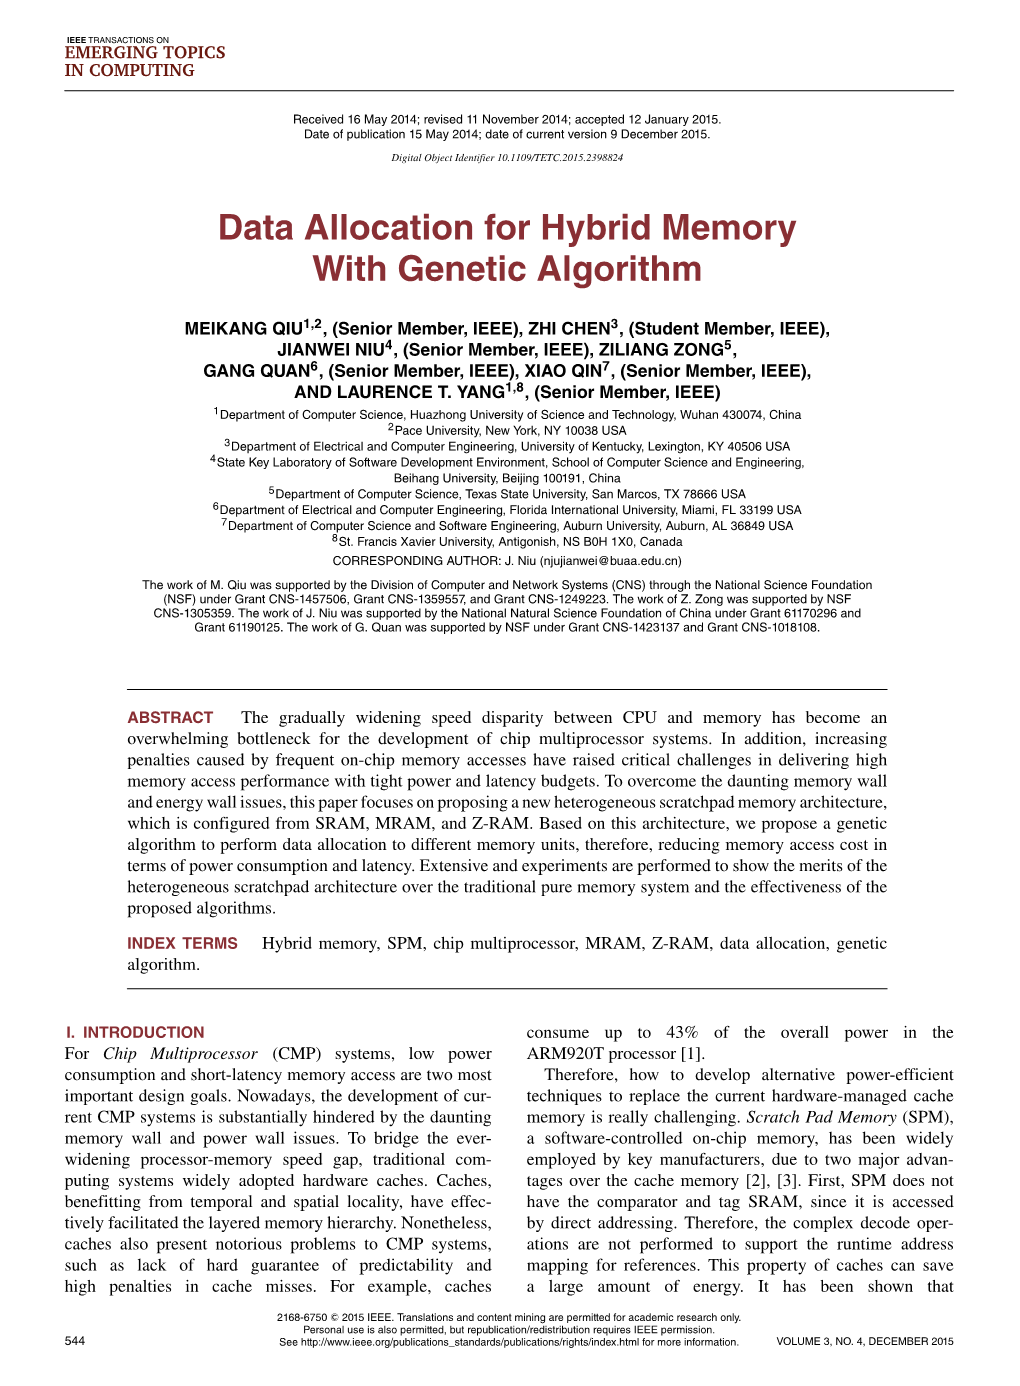 Data Allocation for Hybrid Memory with Genetic Algorithm